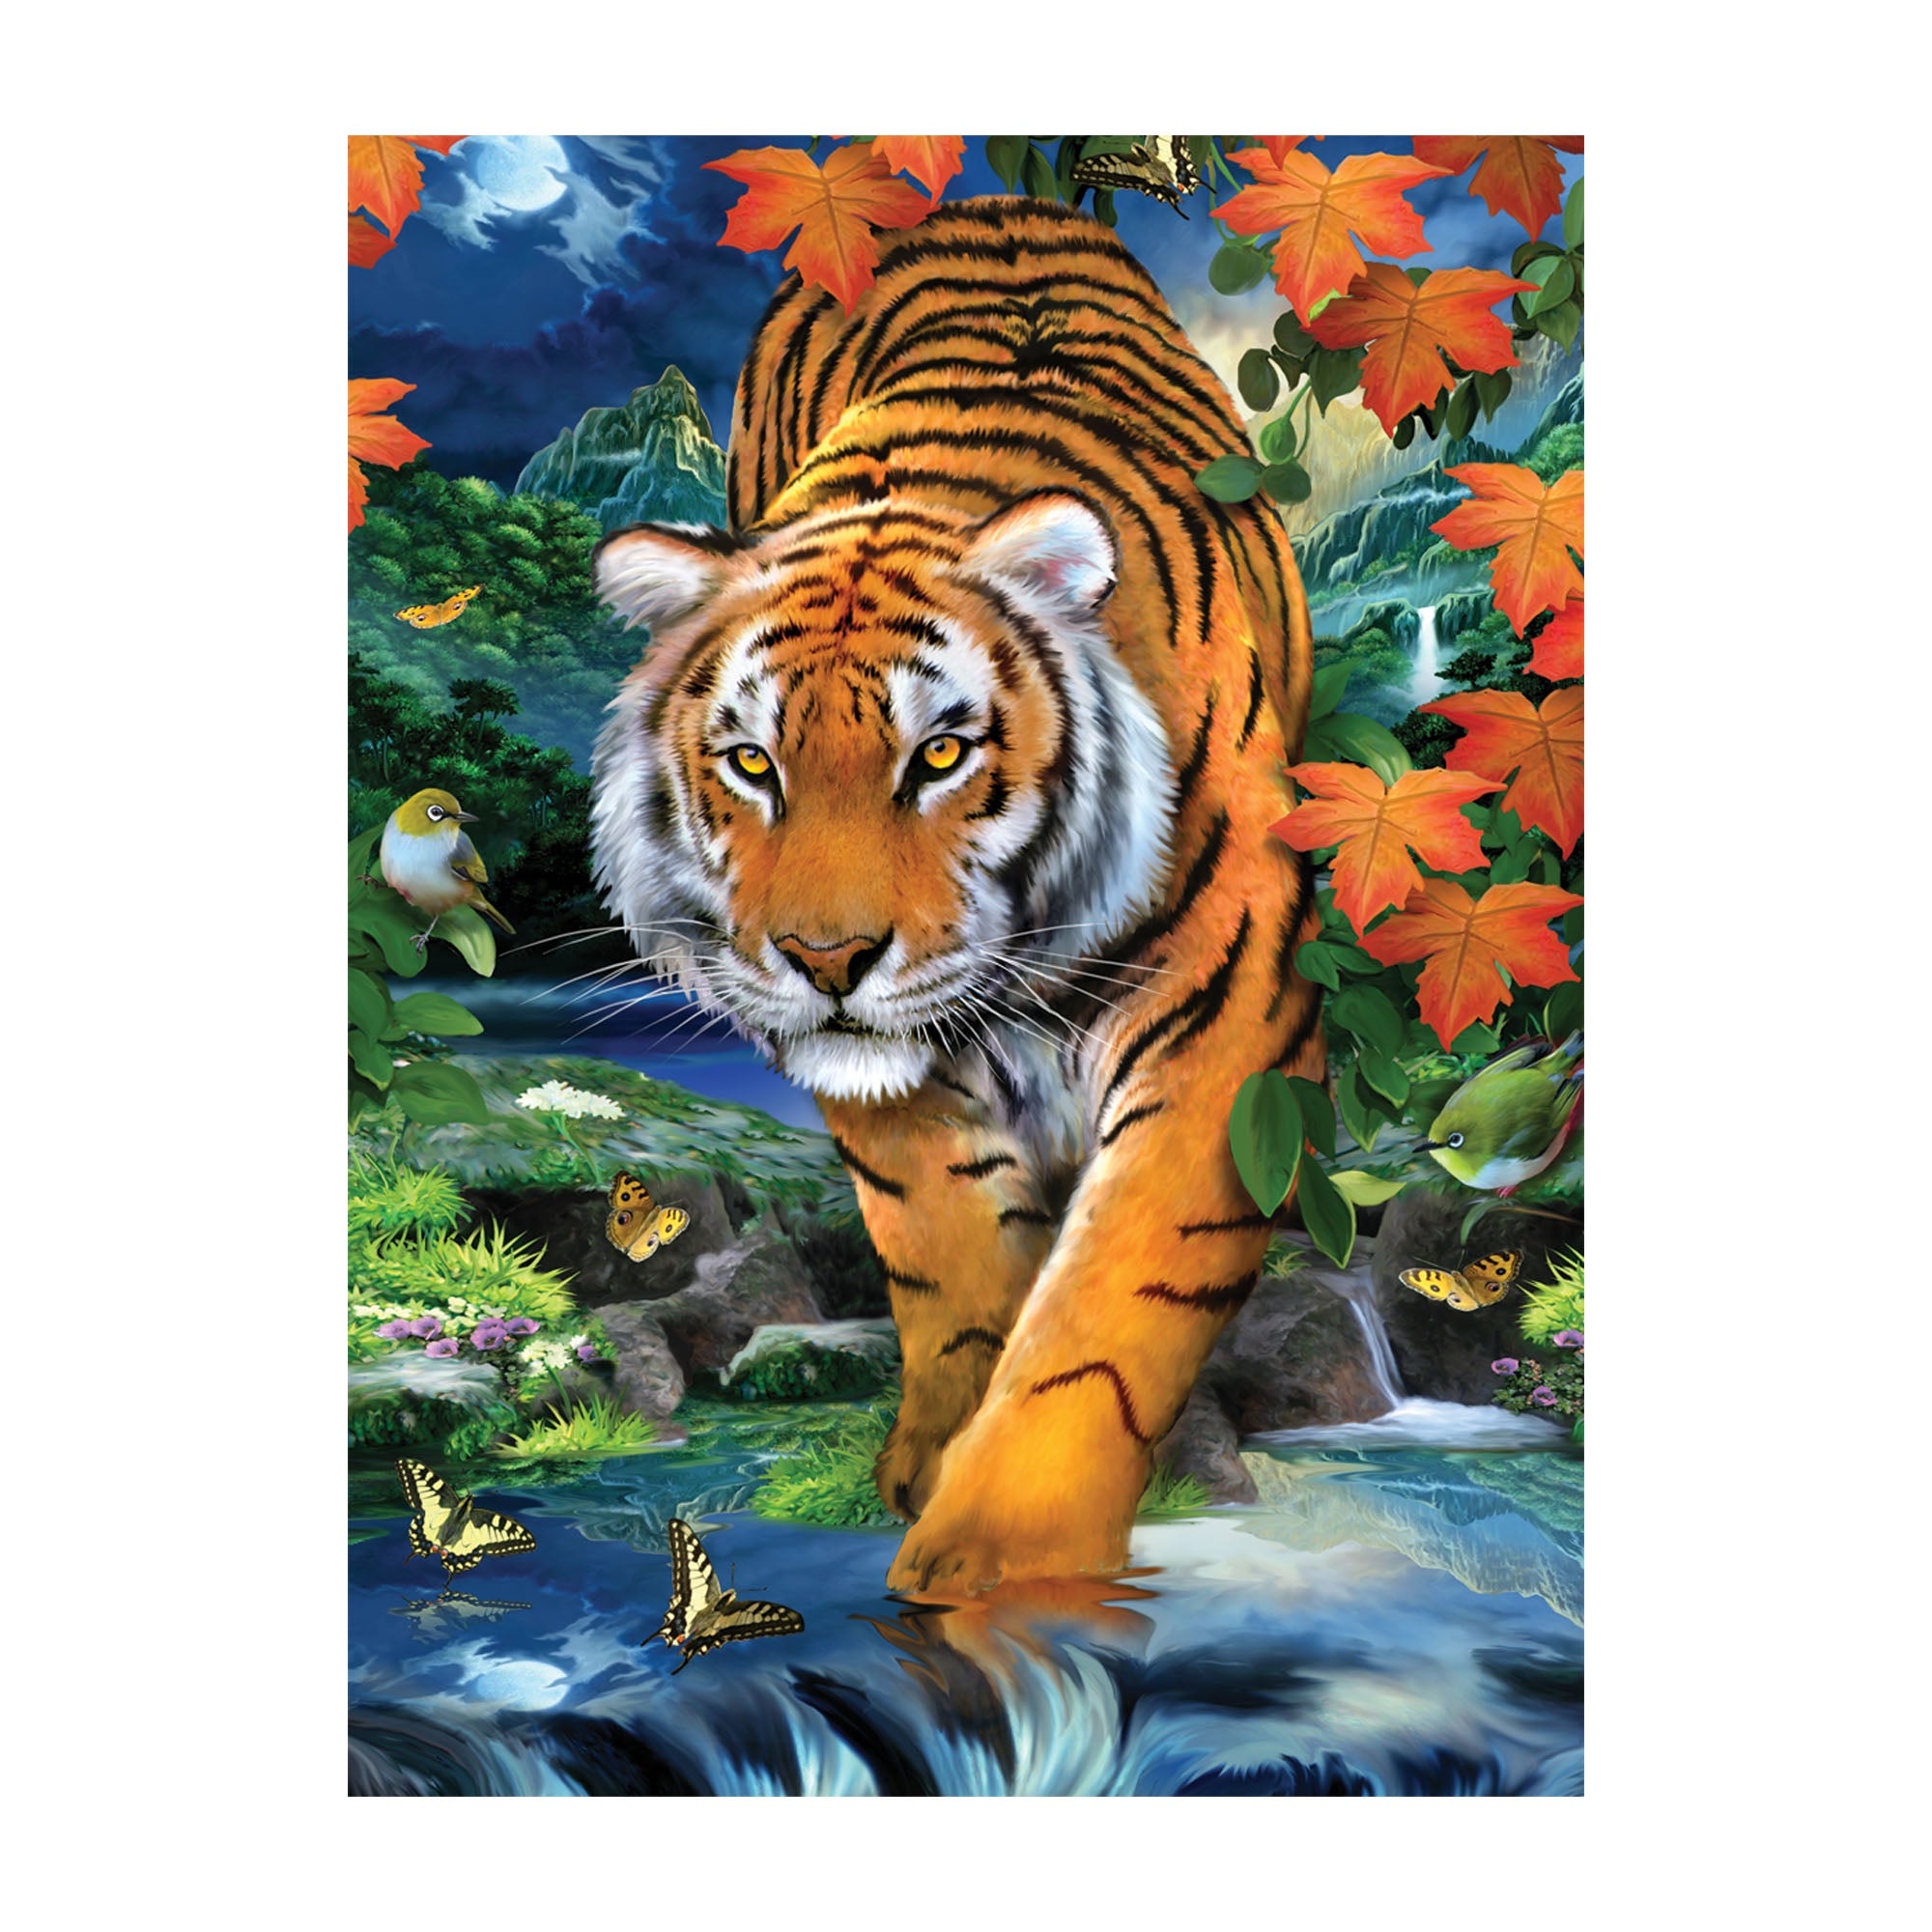 Tiger On The Prowl Paint By Numbers Kit